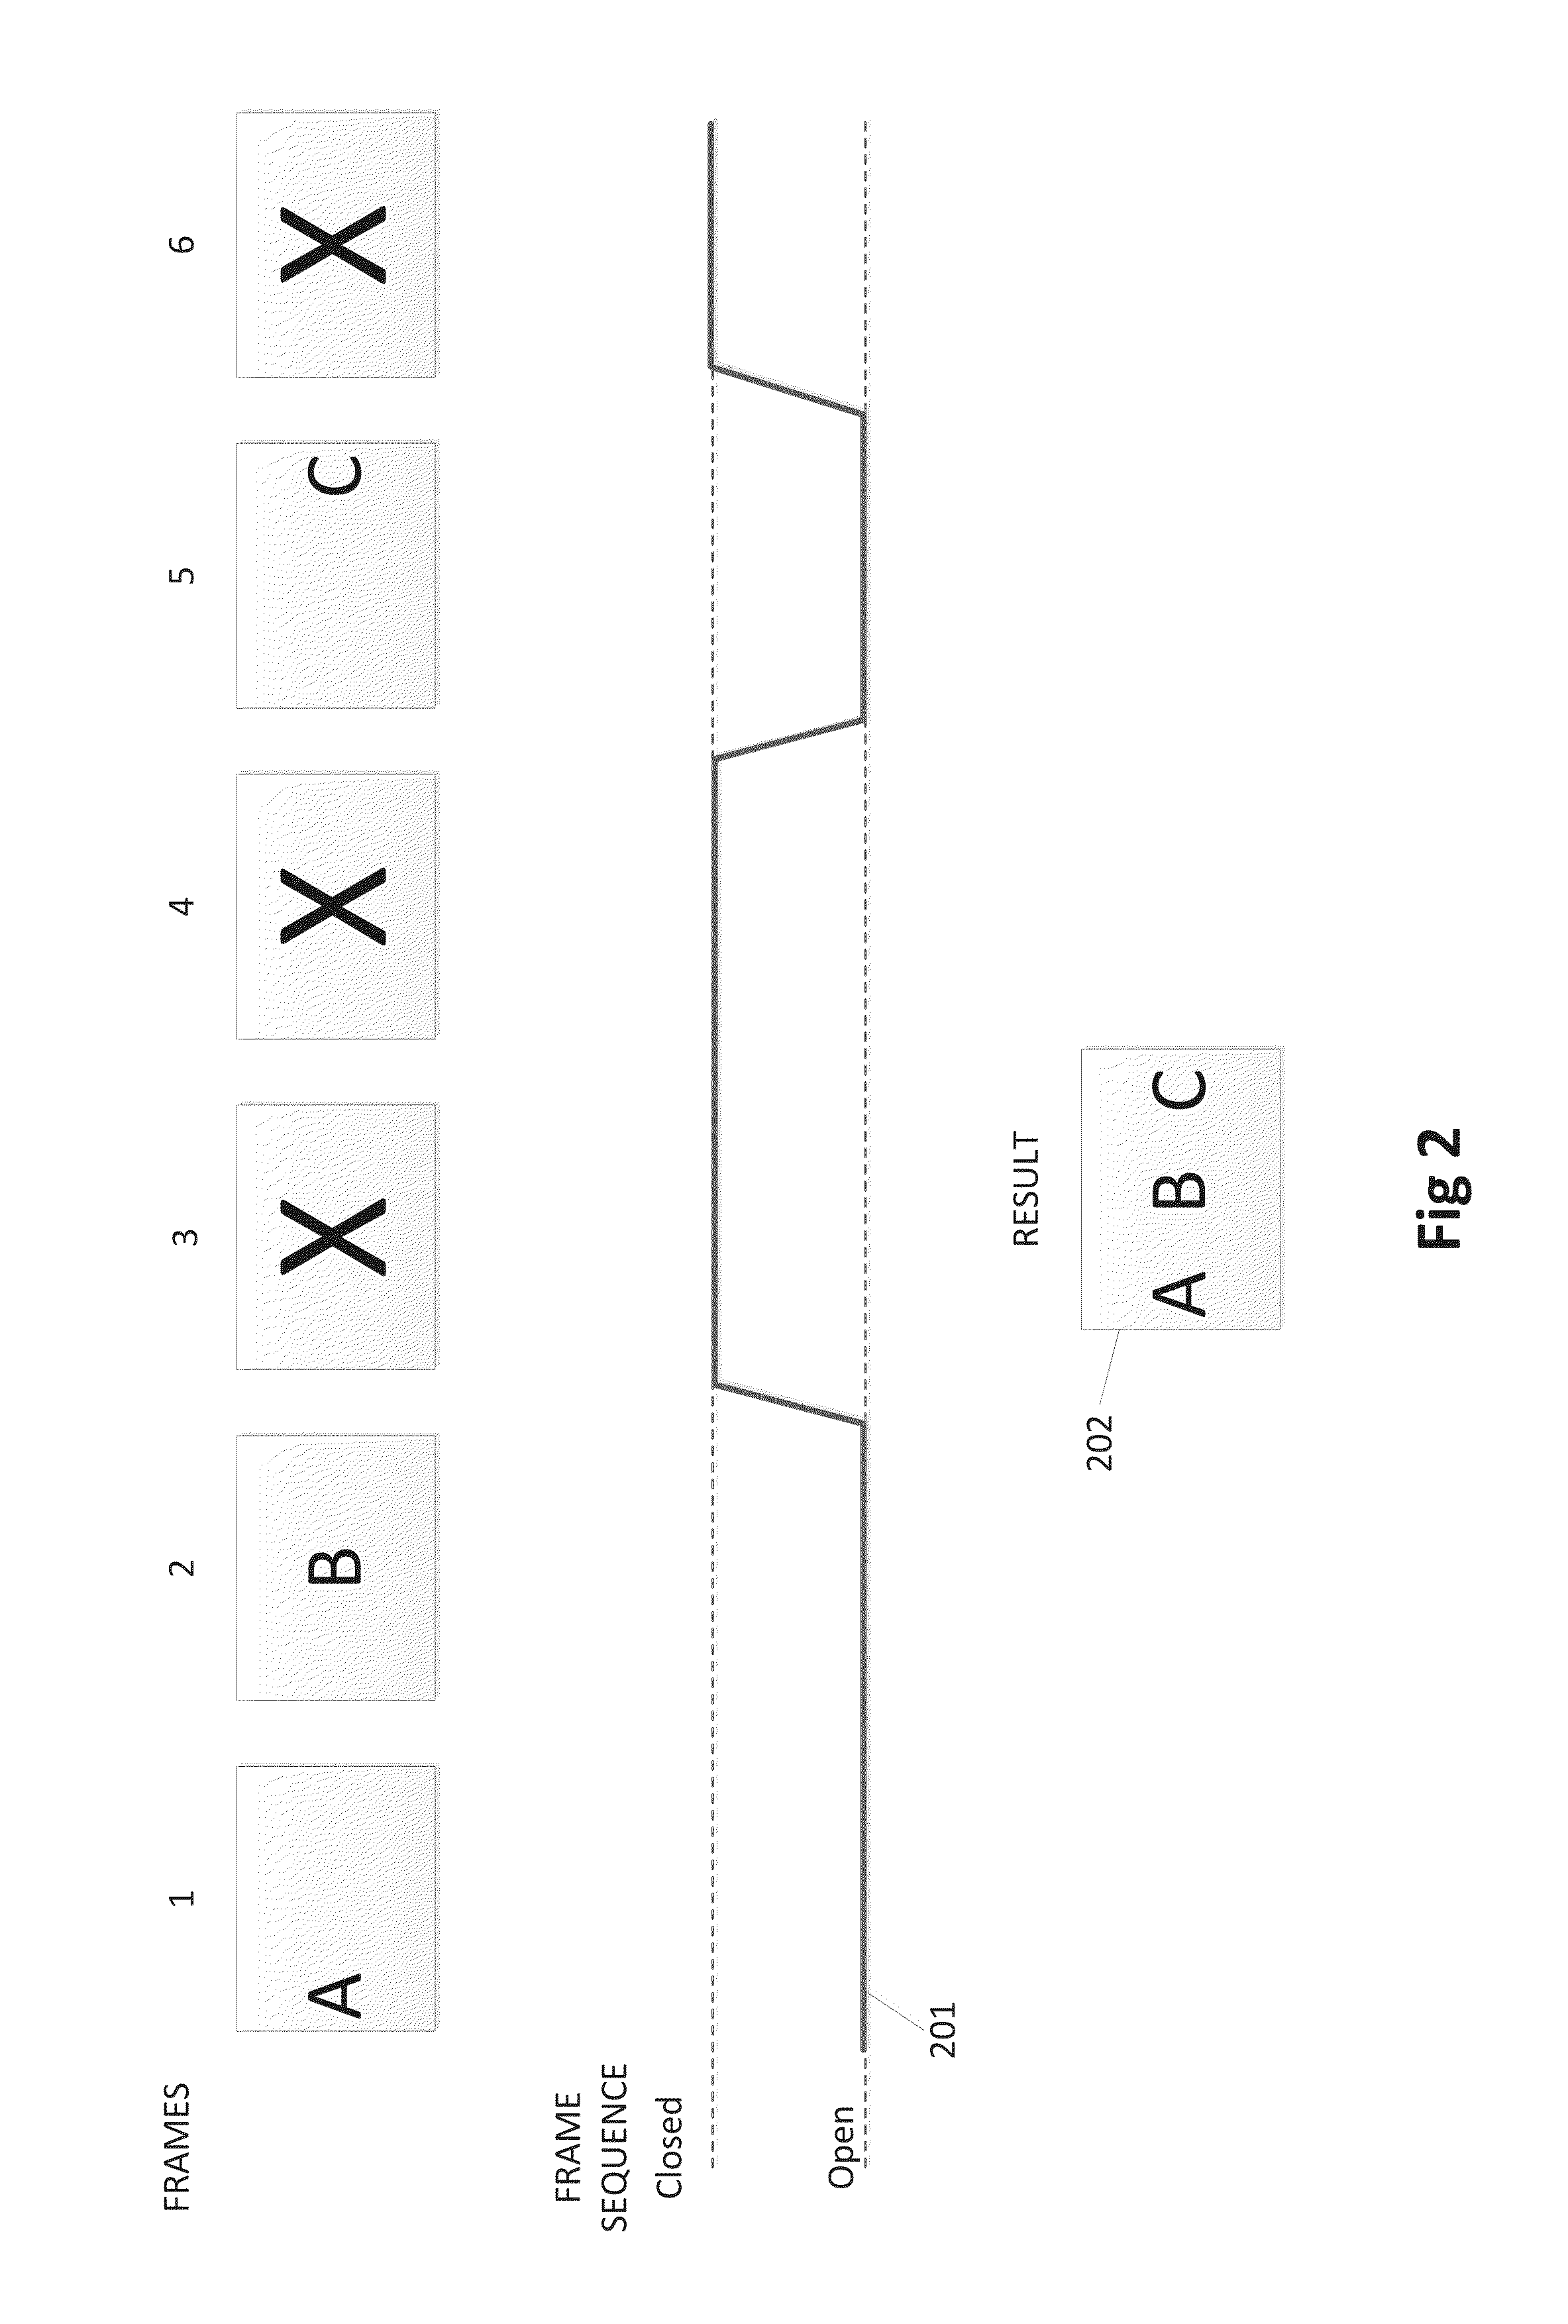 Use of active shutter device to securely display content